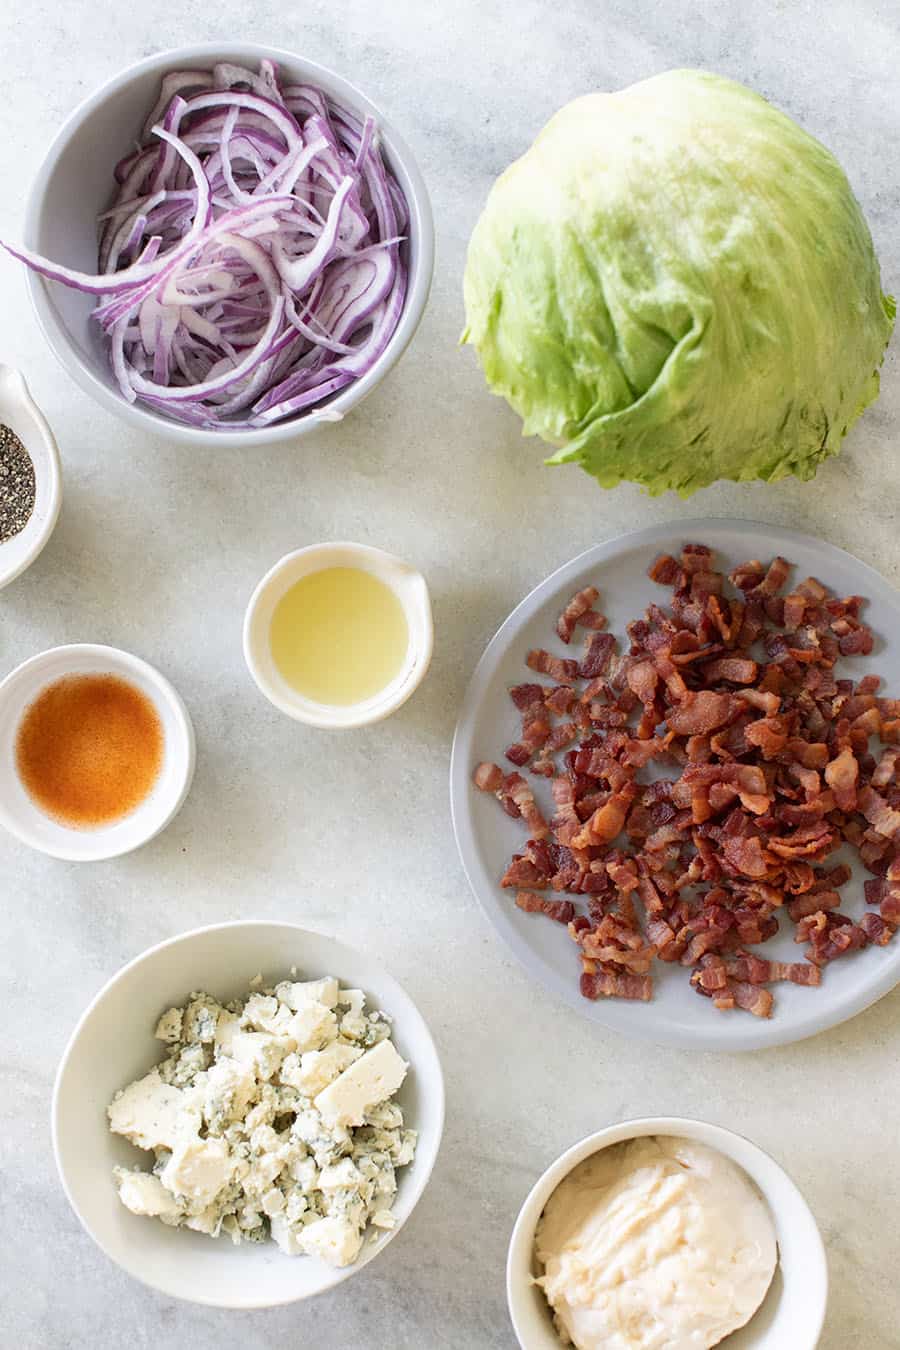 Ingredients for a wedge salad 